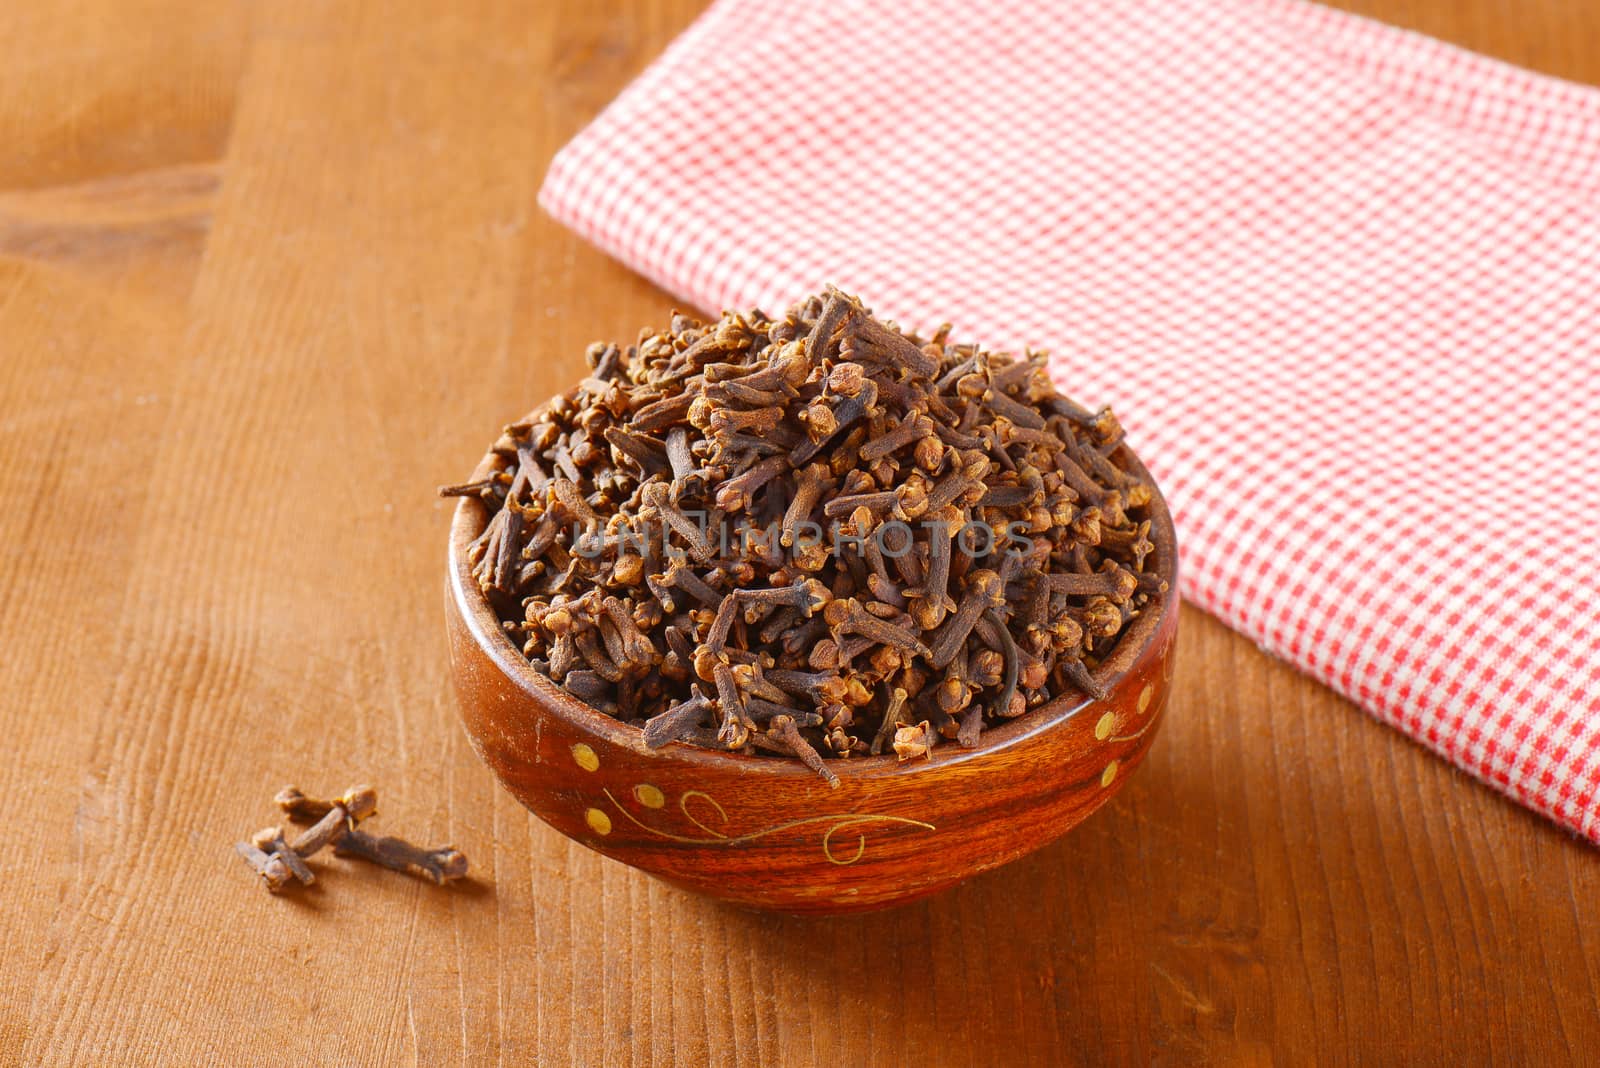 Dried cloves in a bowl